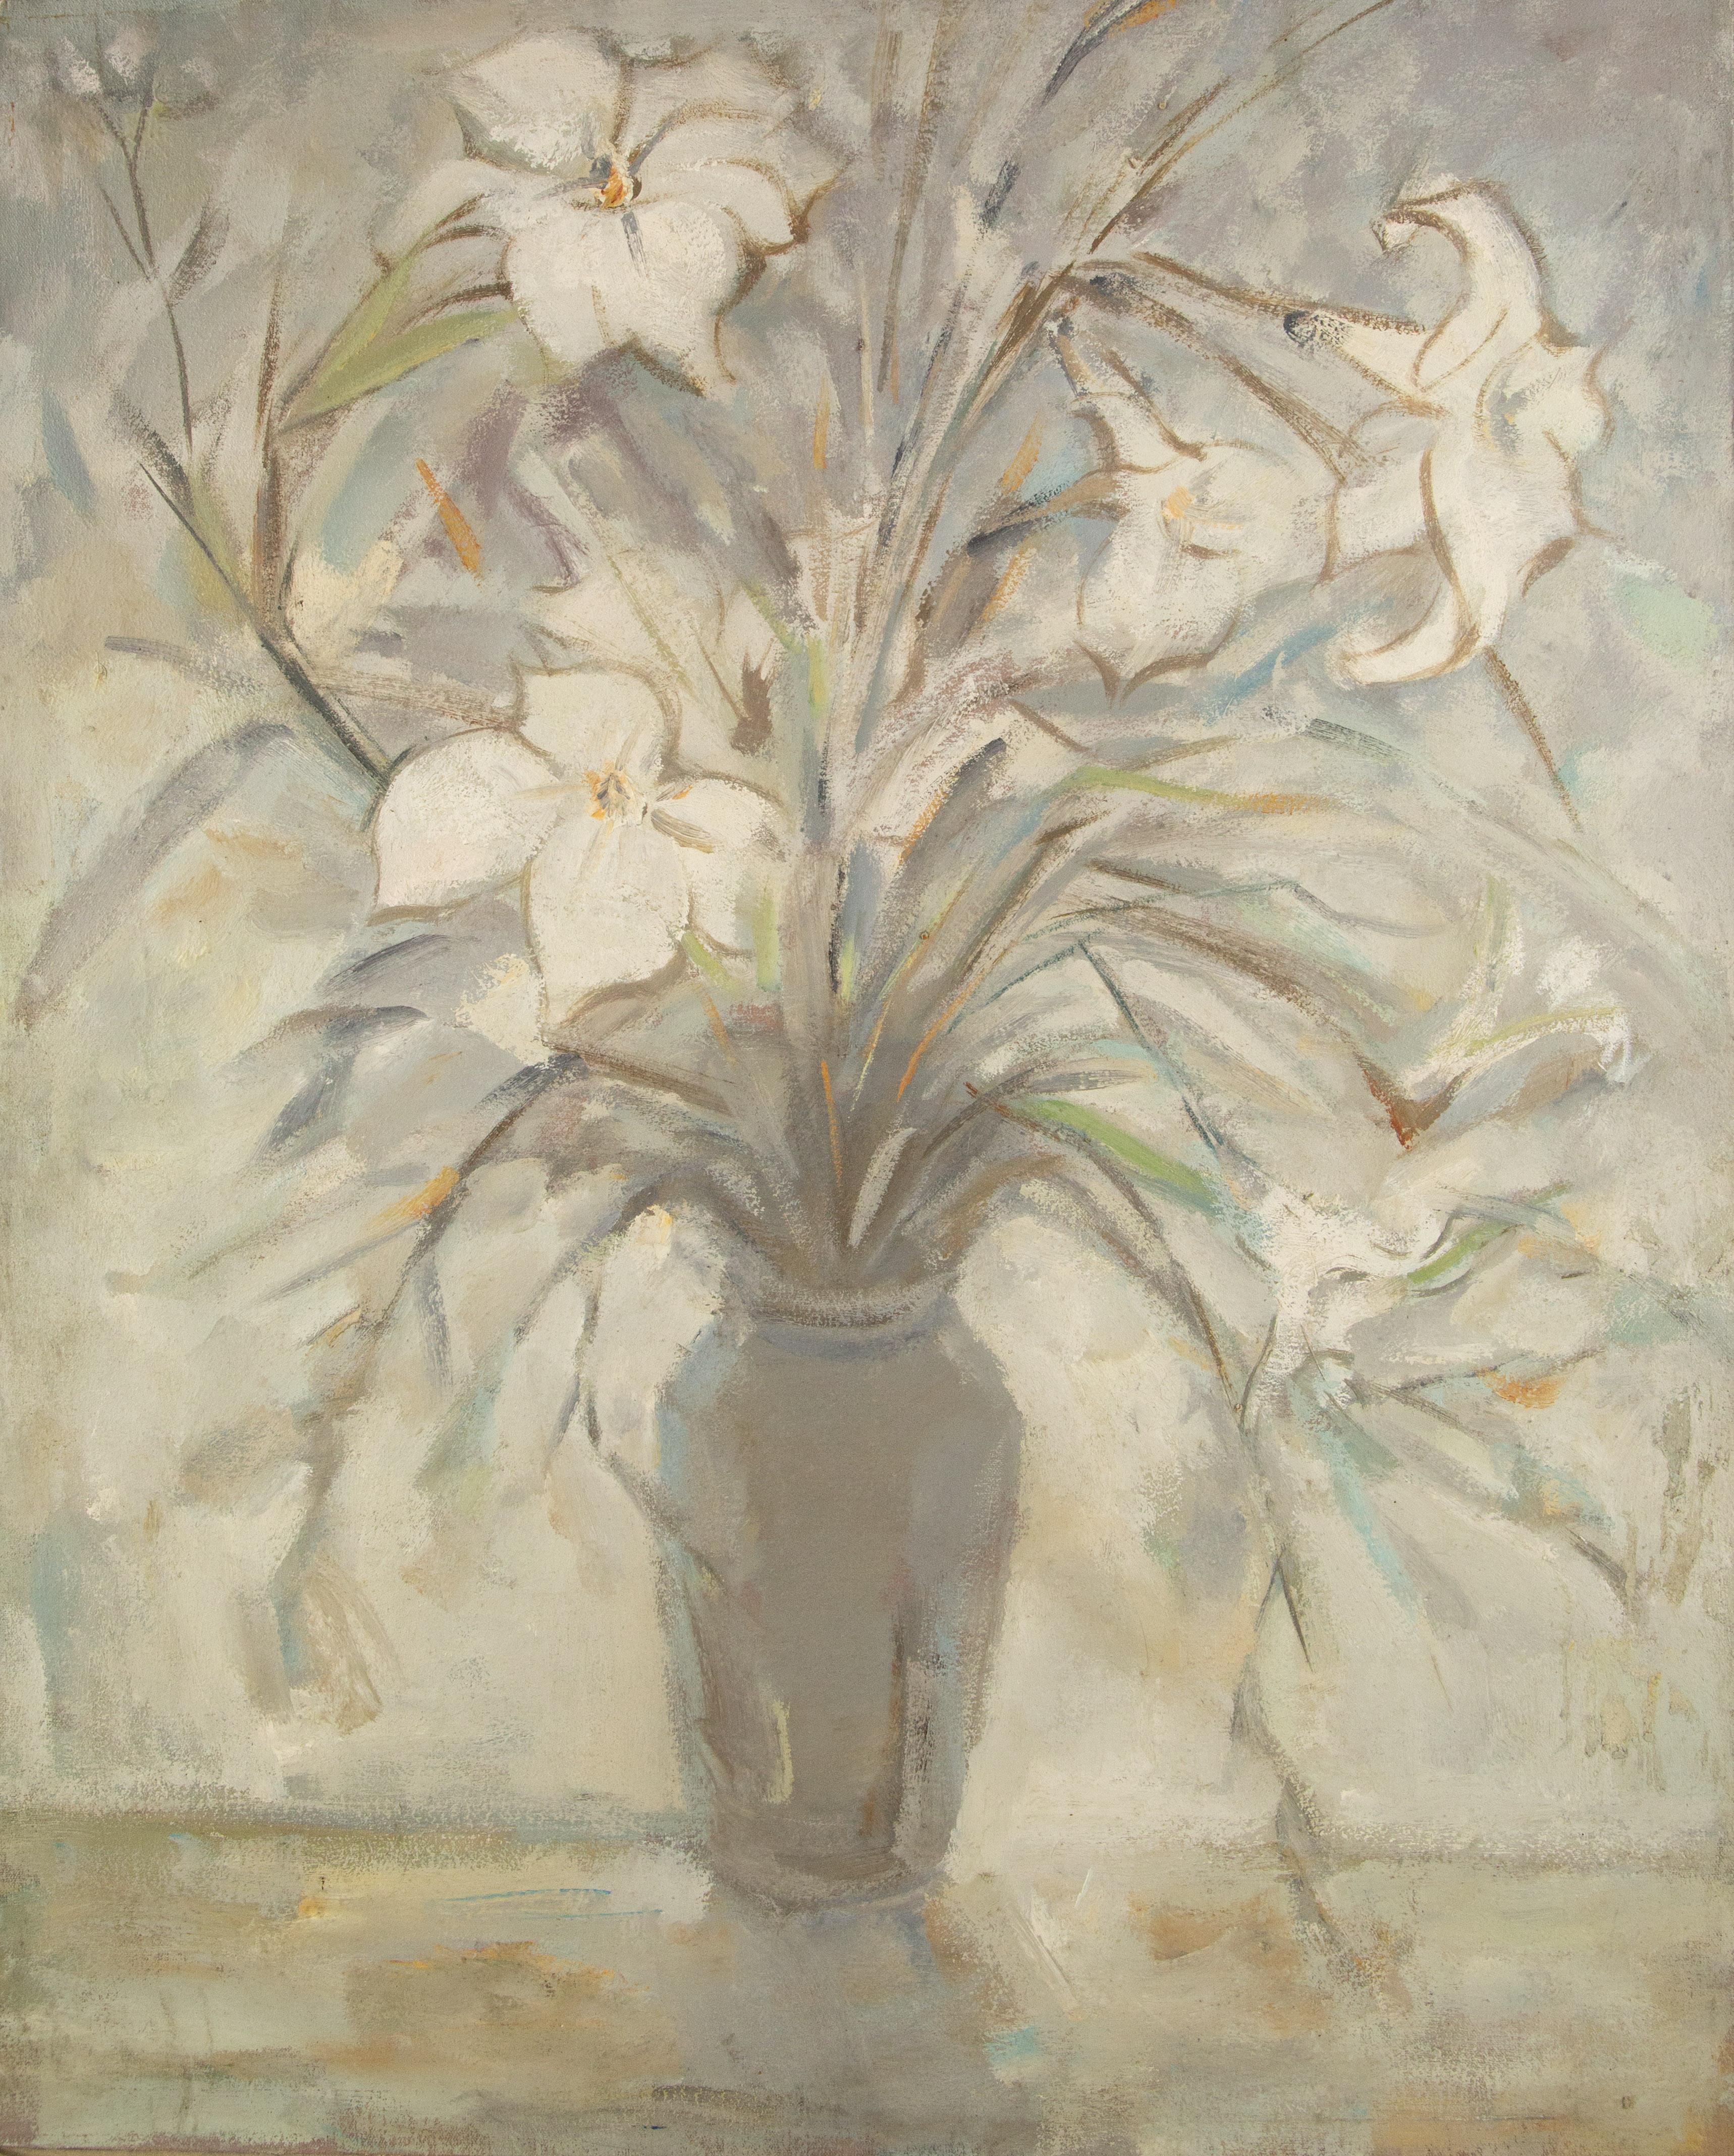  Title: White Blooming
 Medium: Oil on canvas
 Size: 32 x 25.5 inches
 Frame: Framing options available!
 Condition: The painting appears to be in excellent condition.
 Note: This painting is unstretched
 Year: 2012
 Artist: Mingyan Li
 Signature: